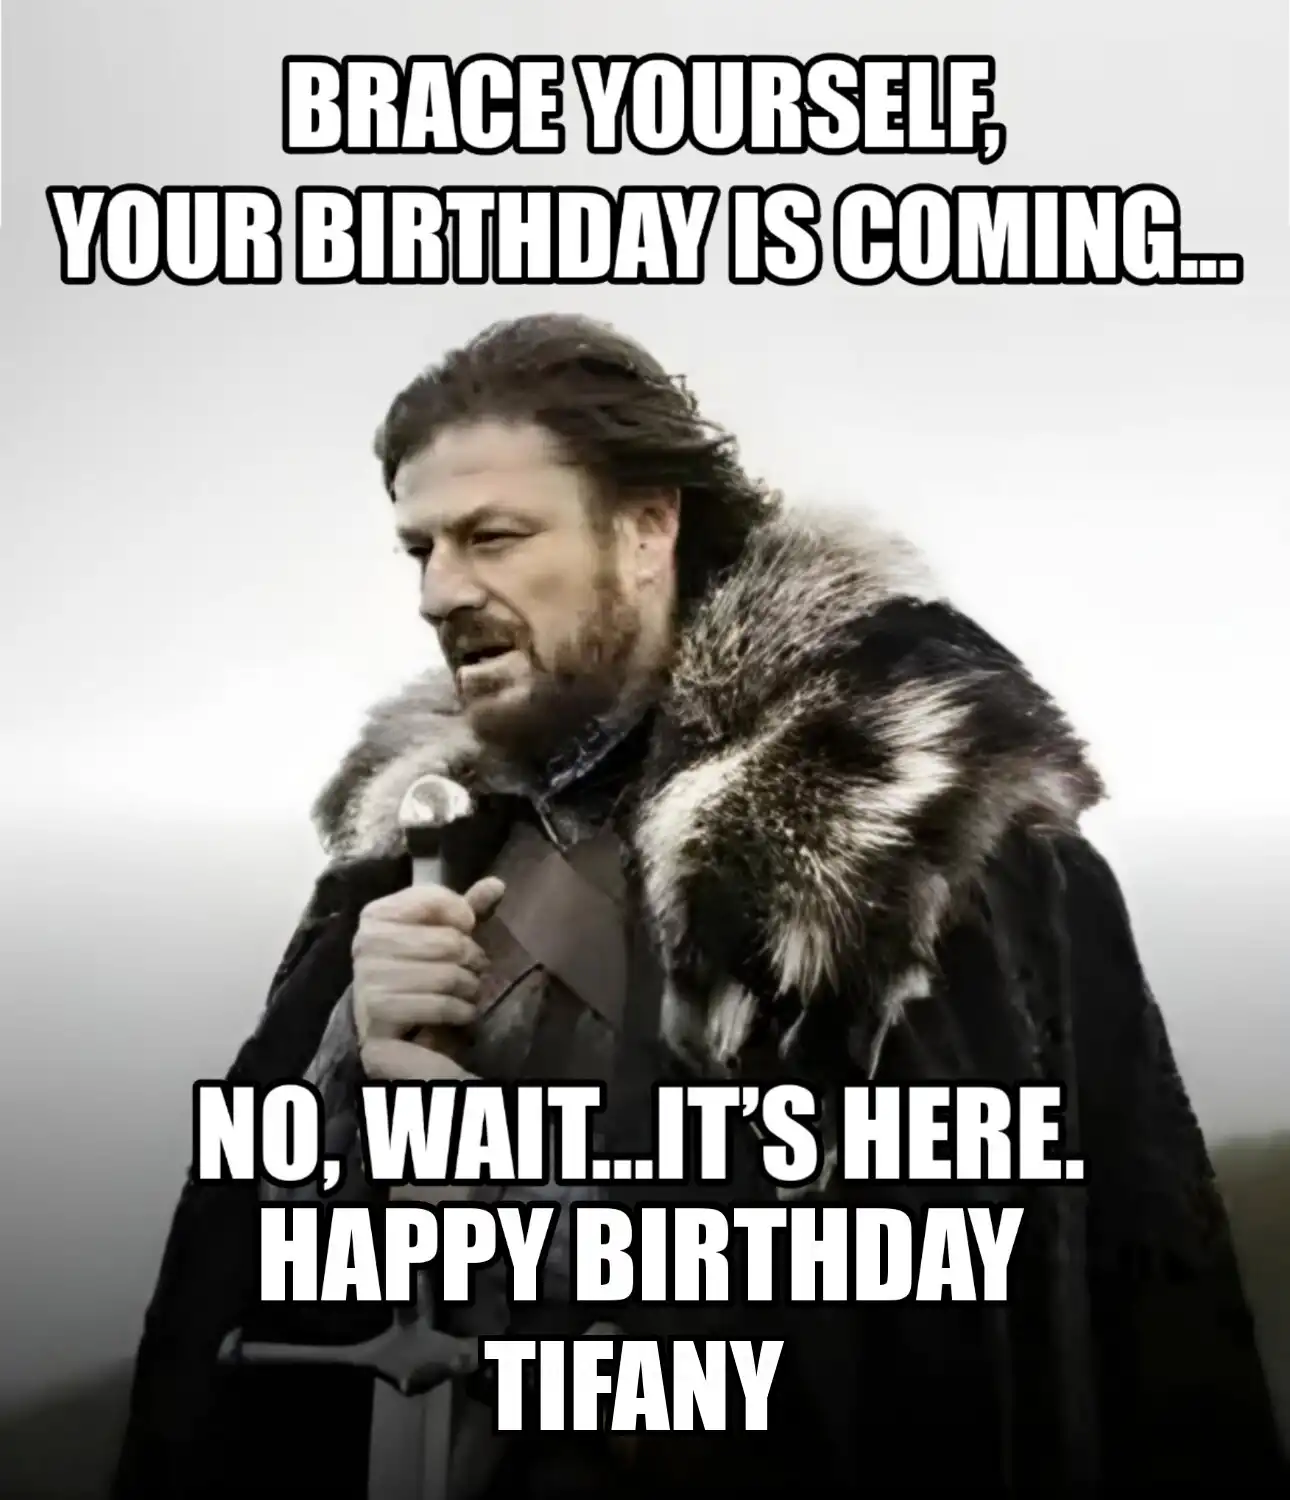 Happy Birthday Tifany Brace Yourself Your Birthday Is Coming Meme